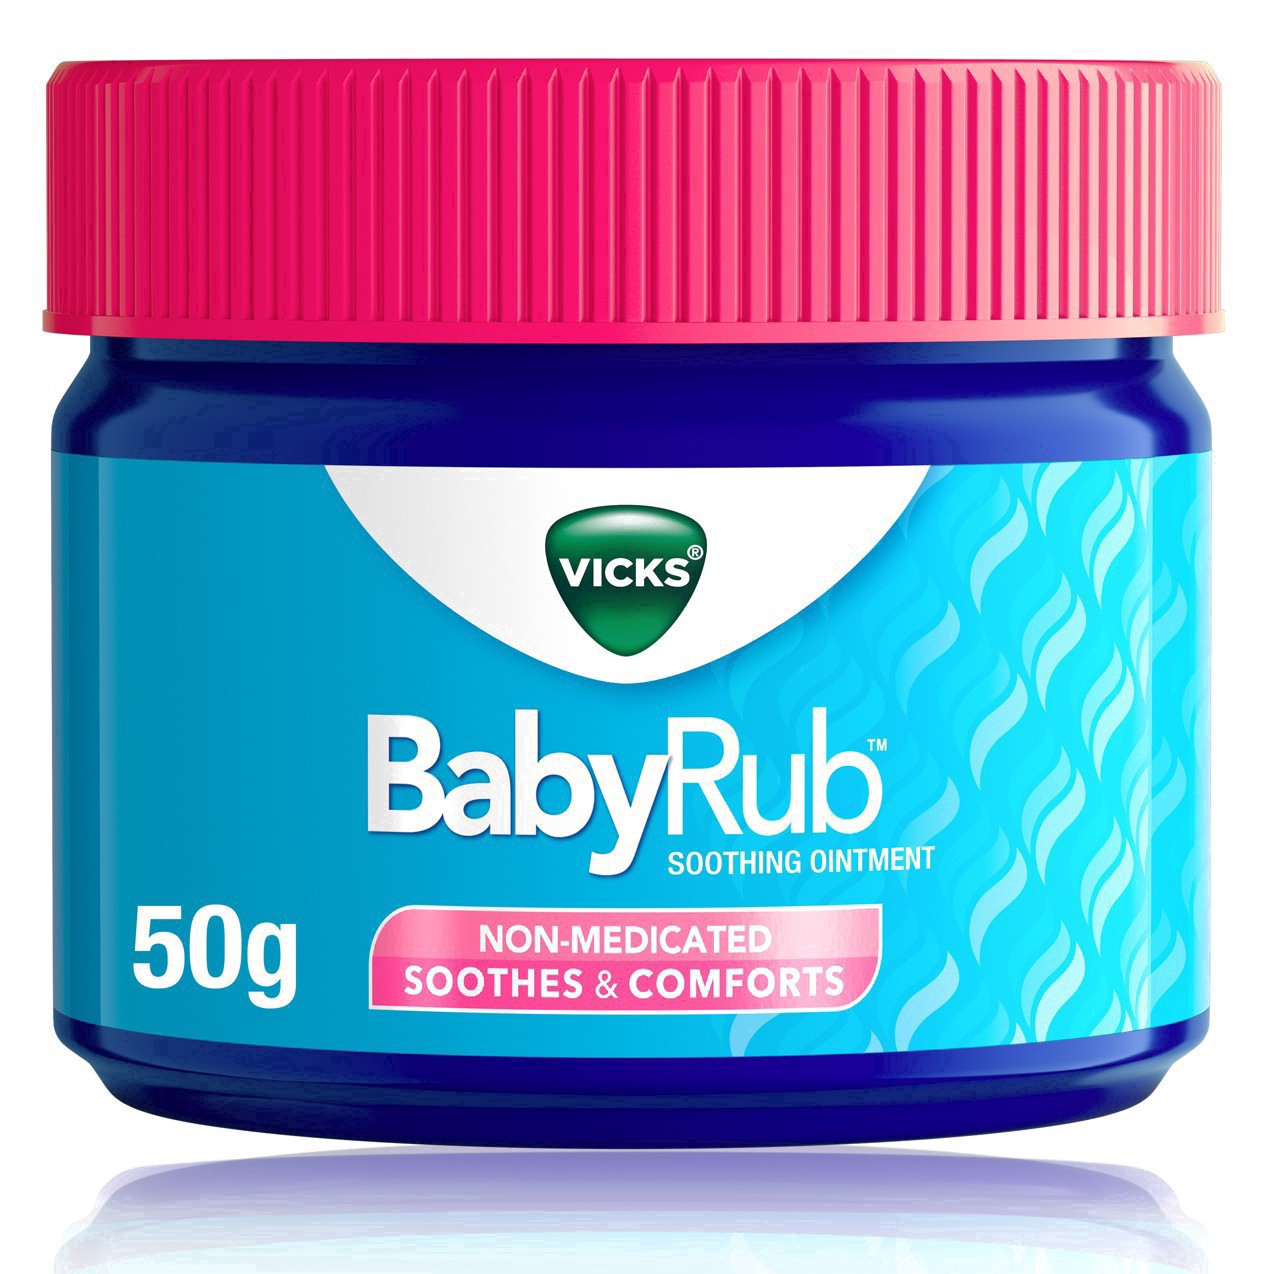 slide 16 of 78, Vicks BabyRub, Chest Rub Ointment with Soothing Aloe, Eucalyptus, Lavender, and Rosemary, from The Makers of VapoRub, 1.76 oz, 1.76 oz